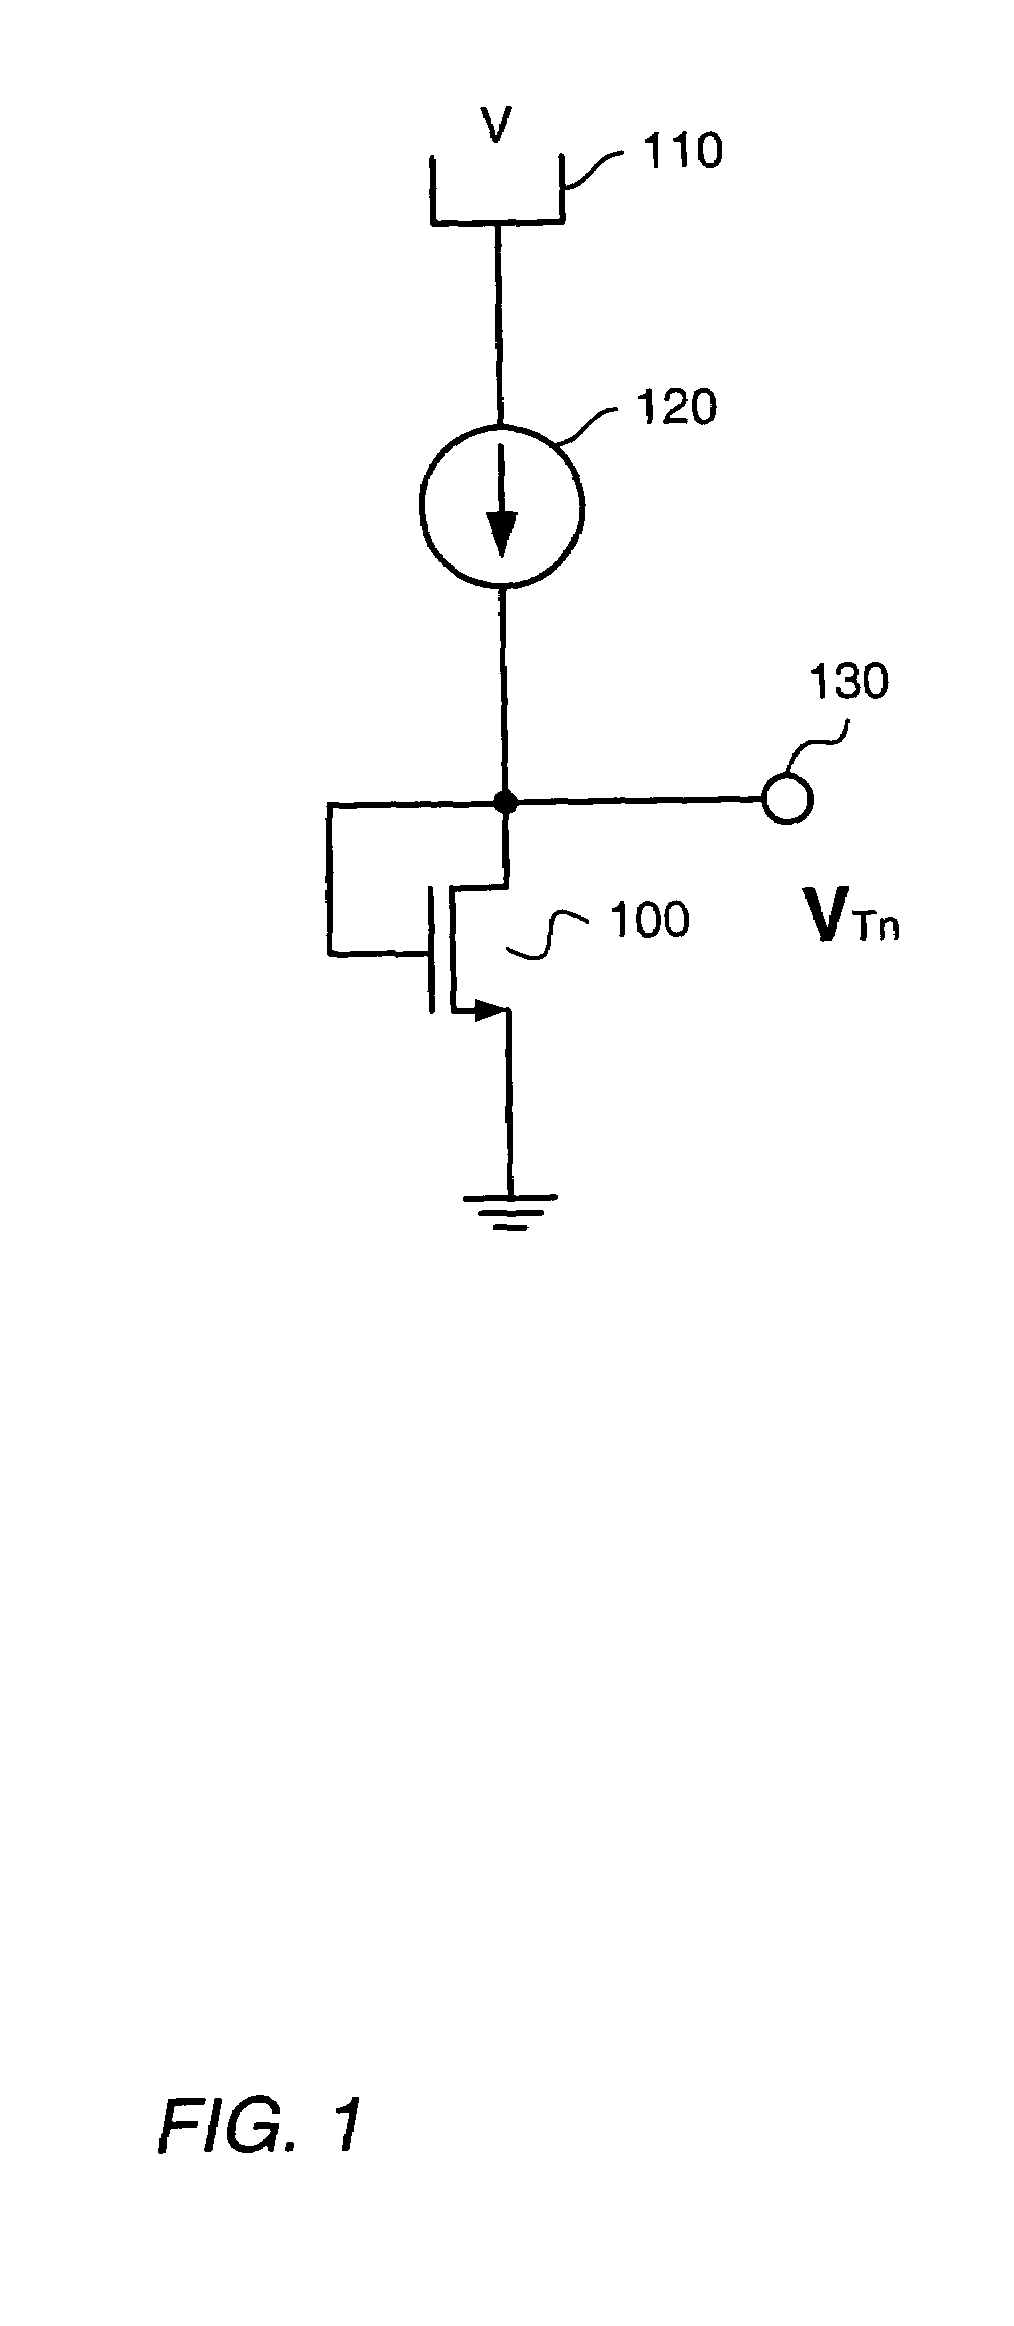 Amplifier with accurate built-in threshold